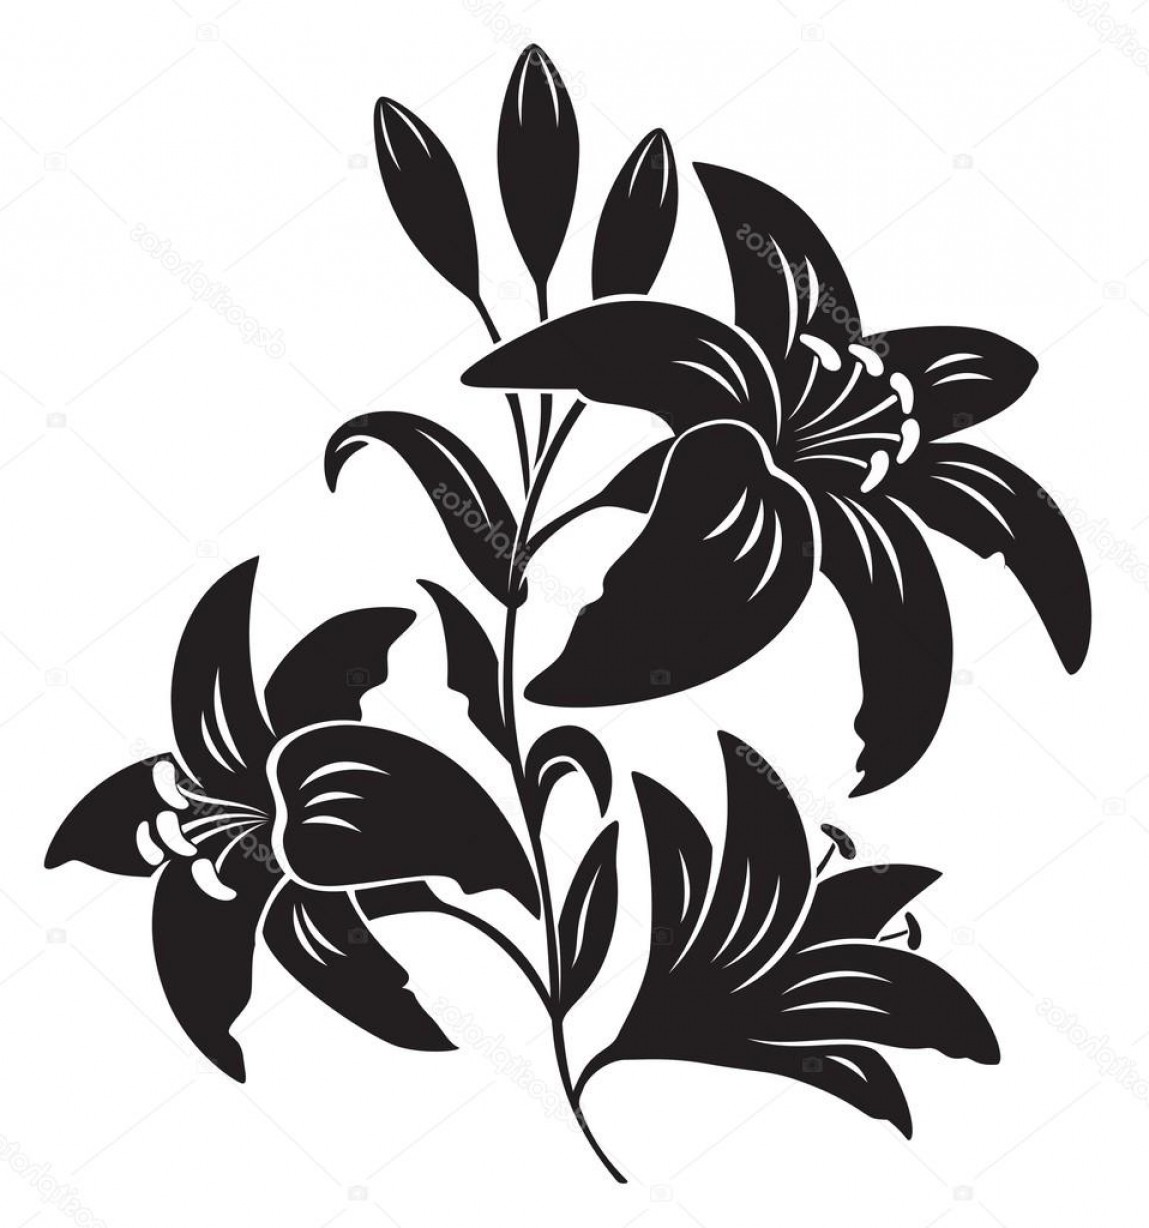 Download Lily Silhouette Vector at Vectorified.com | Collection of Lily Silhouette Vector free for ...